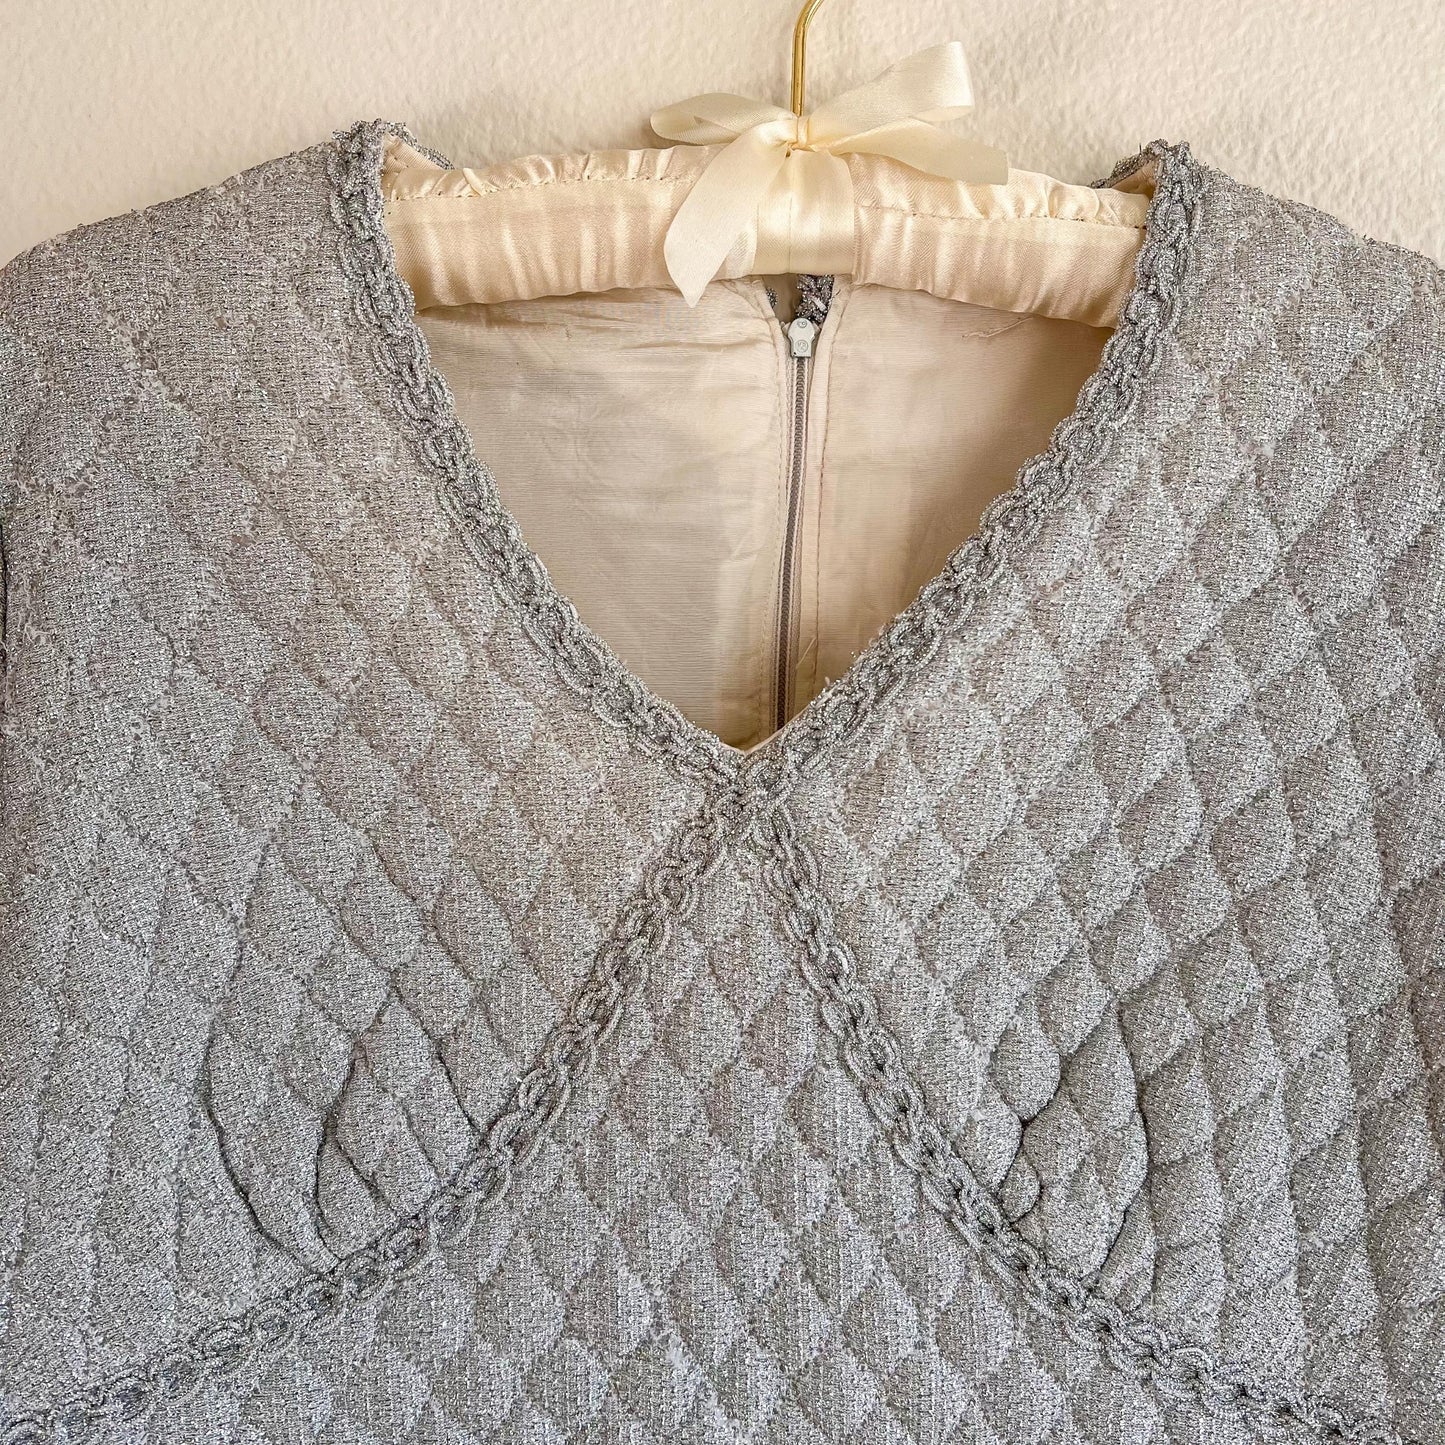 1960s Silver Quilted Mini Dress (S/M)